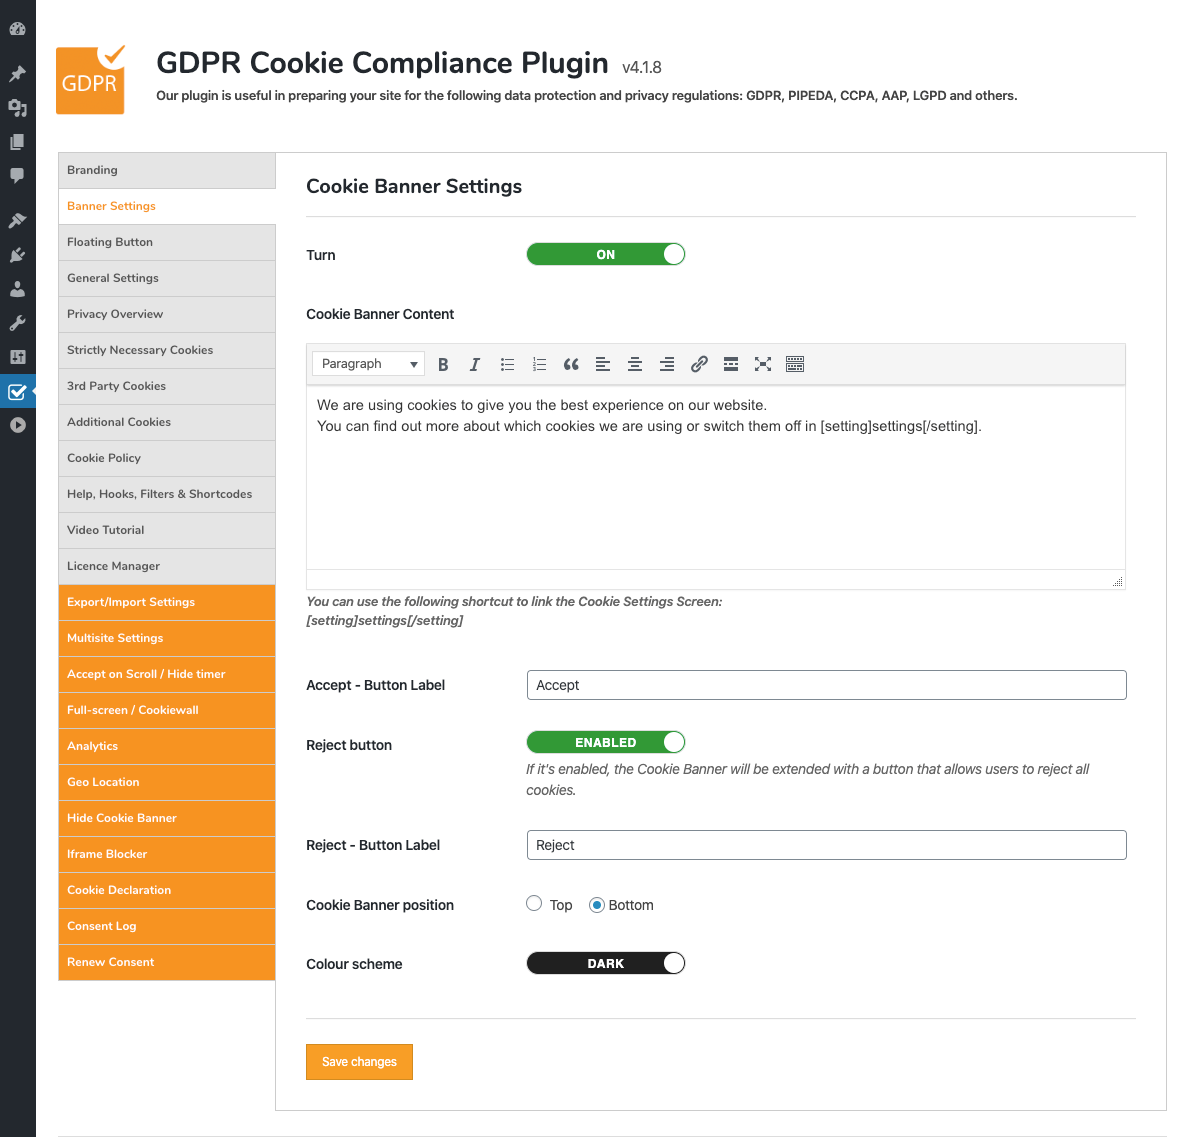 GDPR Cookie Compliance - Front-end - One Page Layout